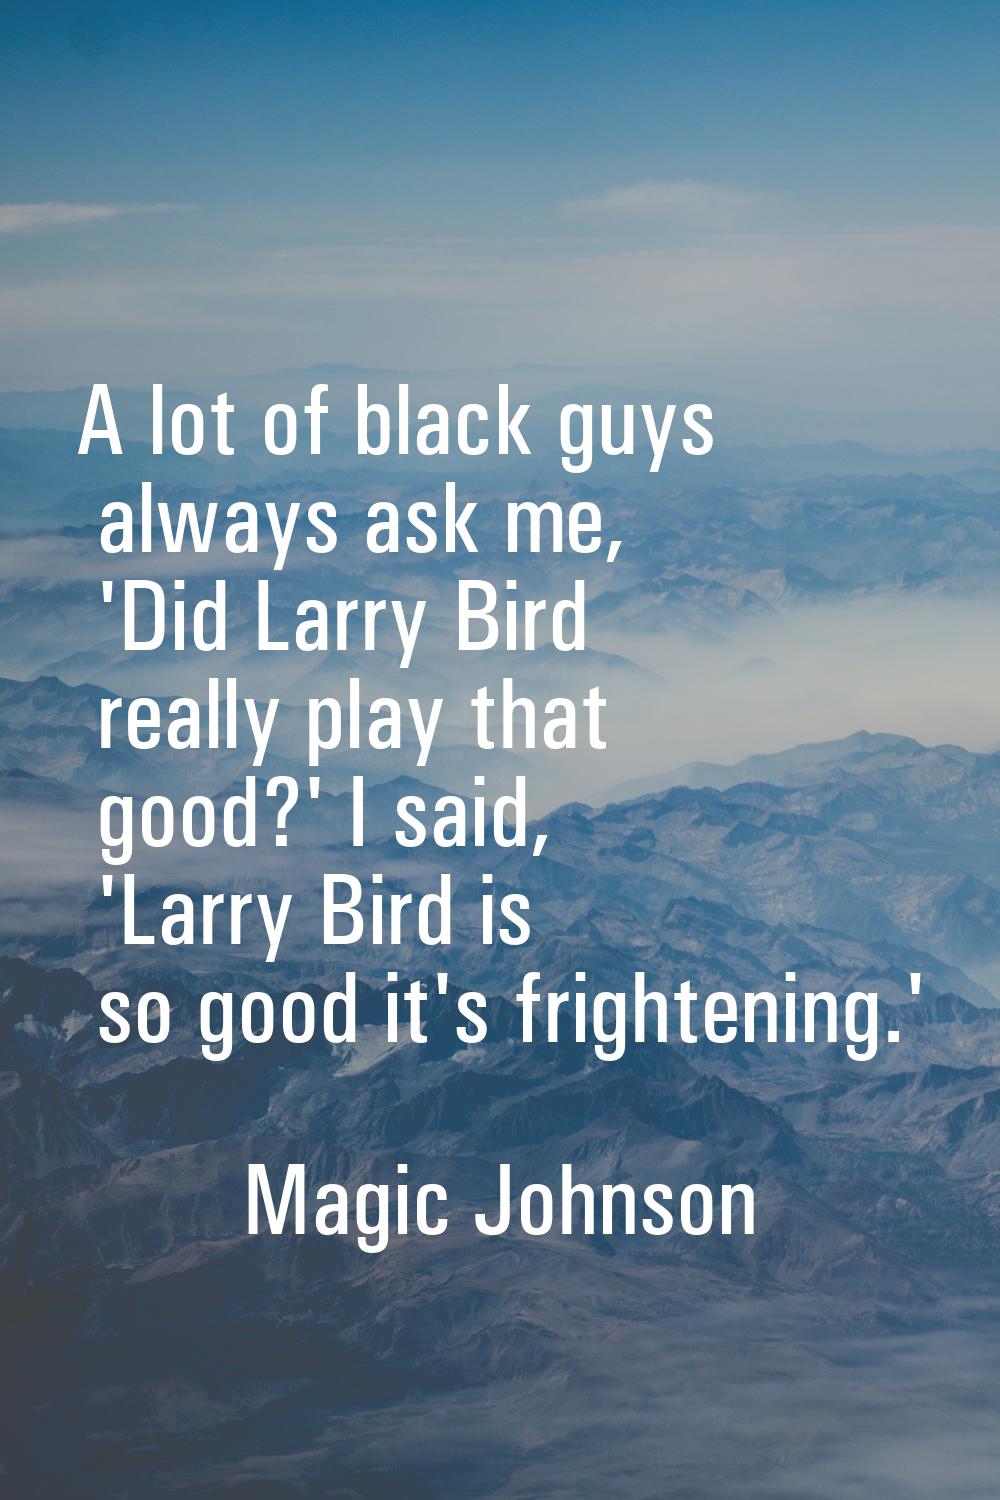 A lot of black guys always ask me, 'Did Larry Bird really play that good?' I said, 'Larry Bird is s